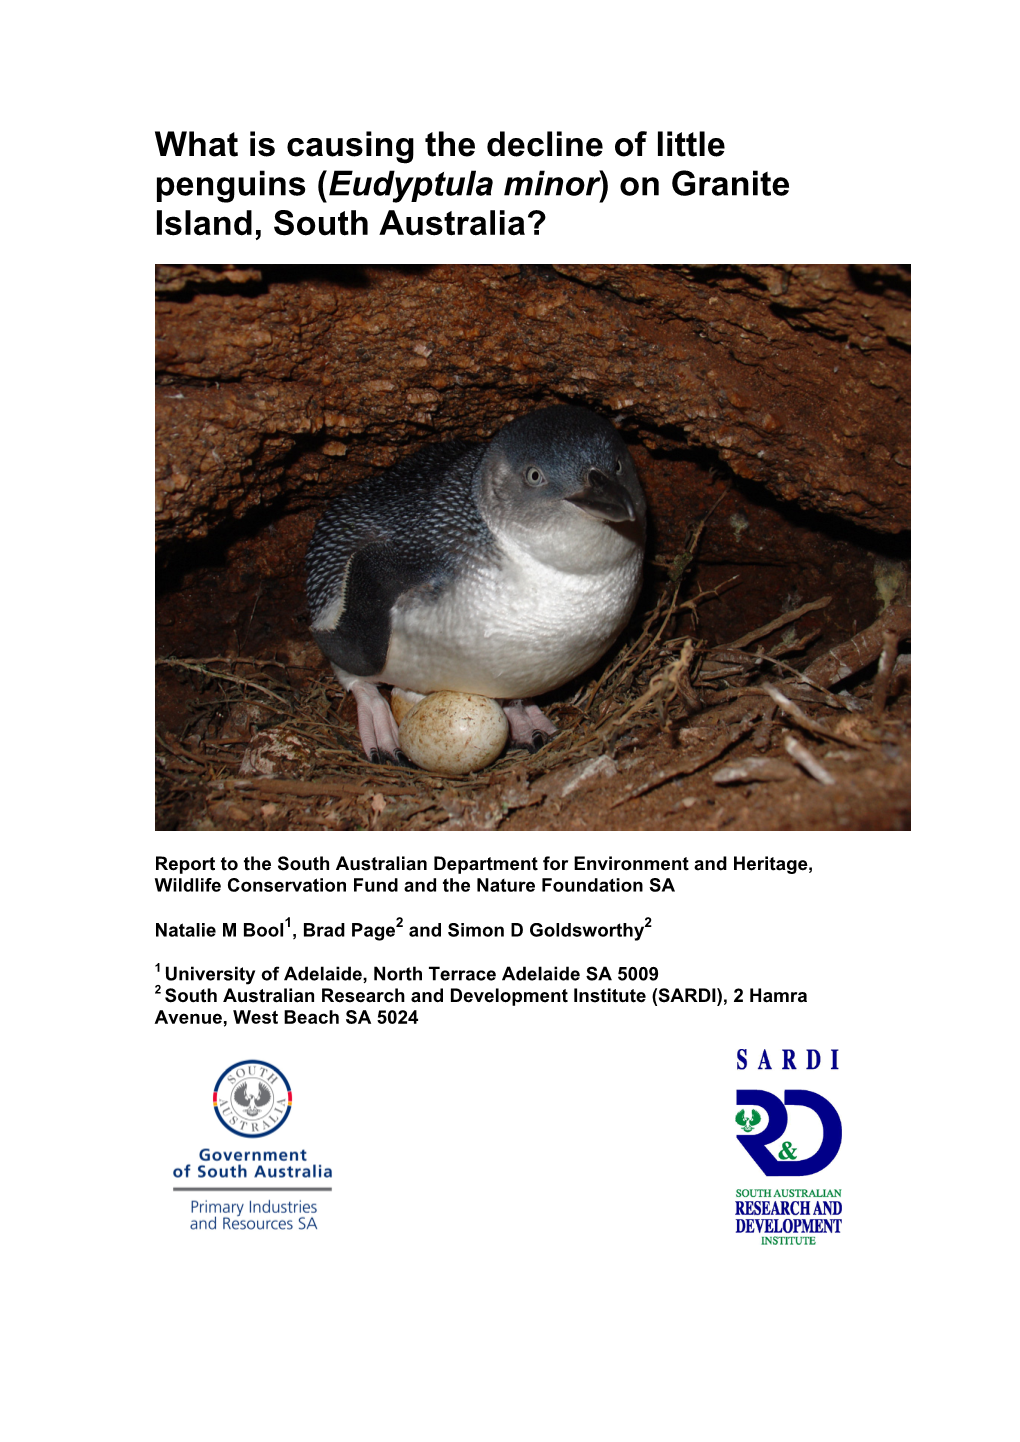 What Is Causing the Decline of Little Penguins (Eudyptula Minor) on Granite Island, South Australia?